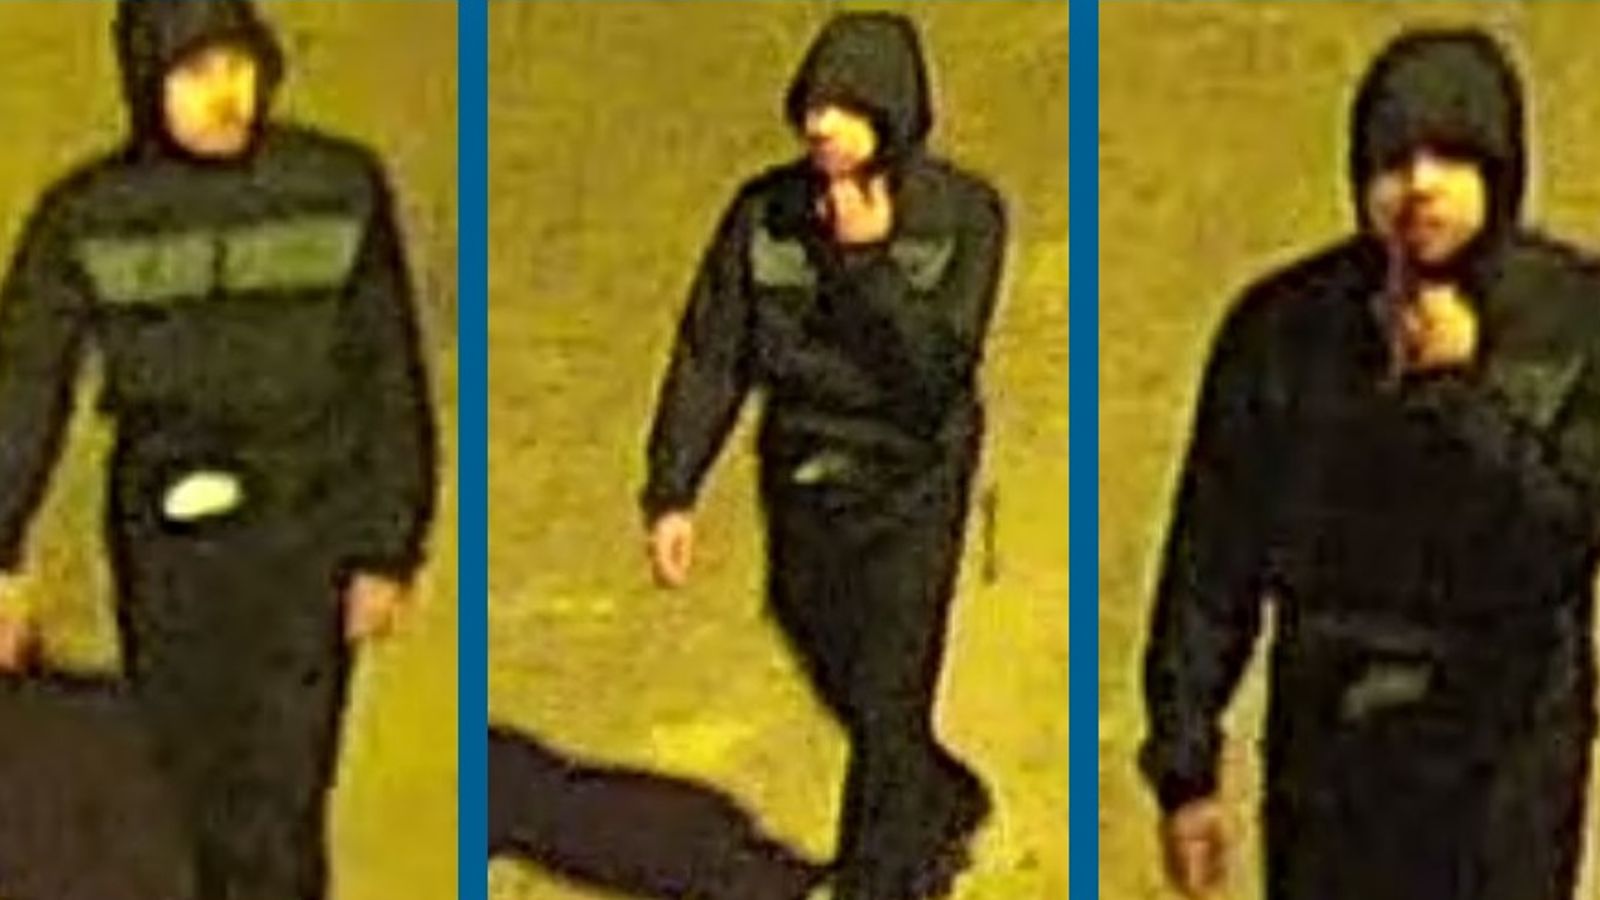 Bournemouth: CCTV images released of suspect after woman stabbed to death on beach